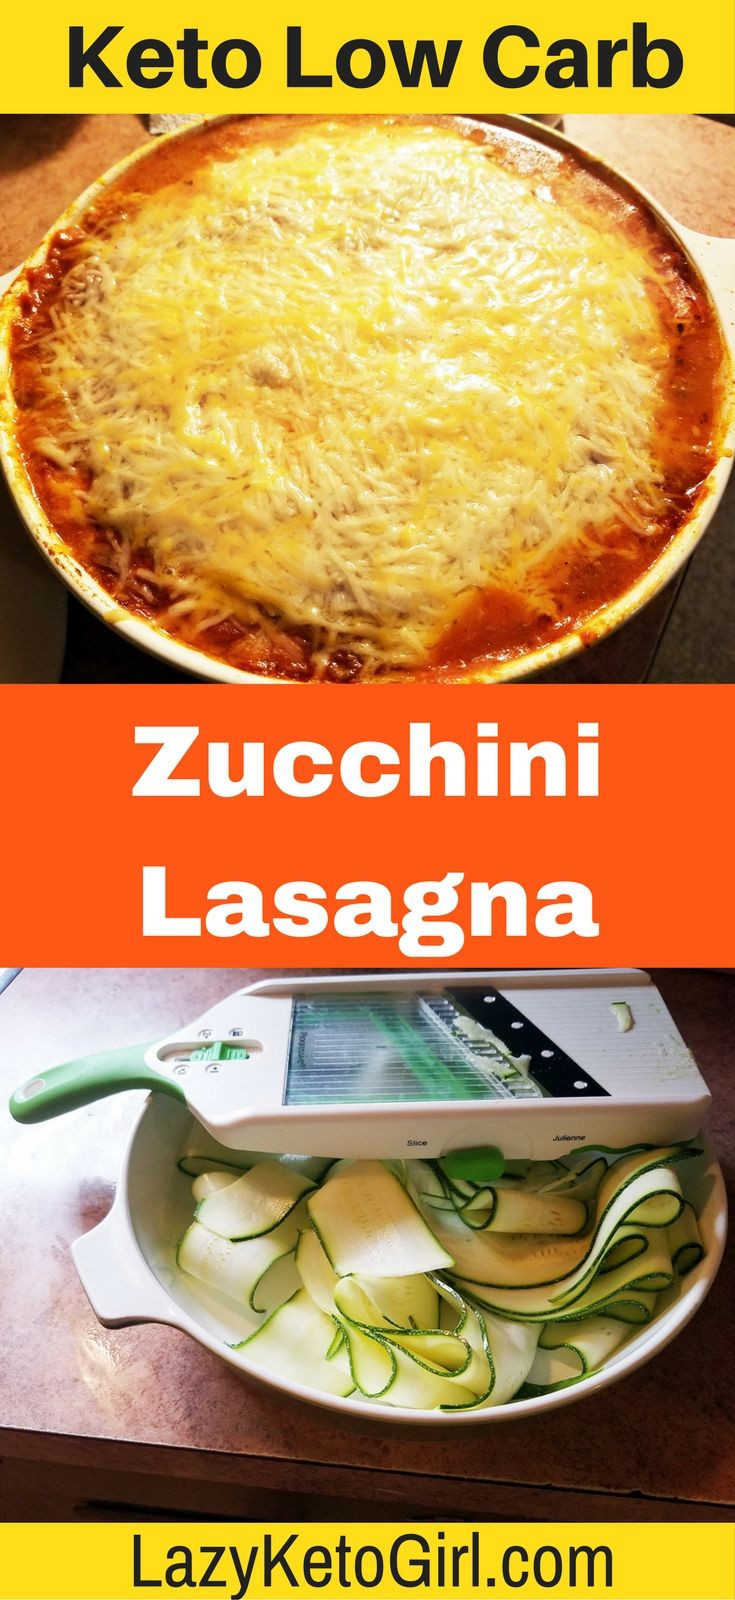 Low Carb Italian Recipes
 225 best Low Carb Italian Recipes images on Pinterest